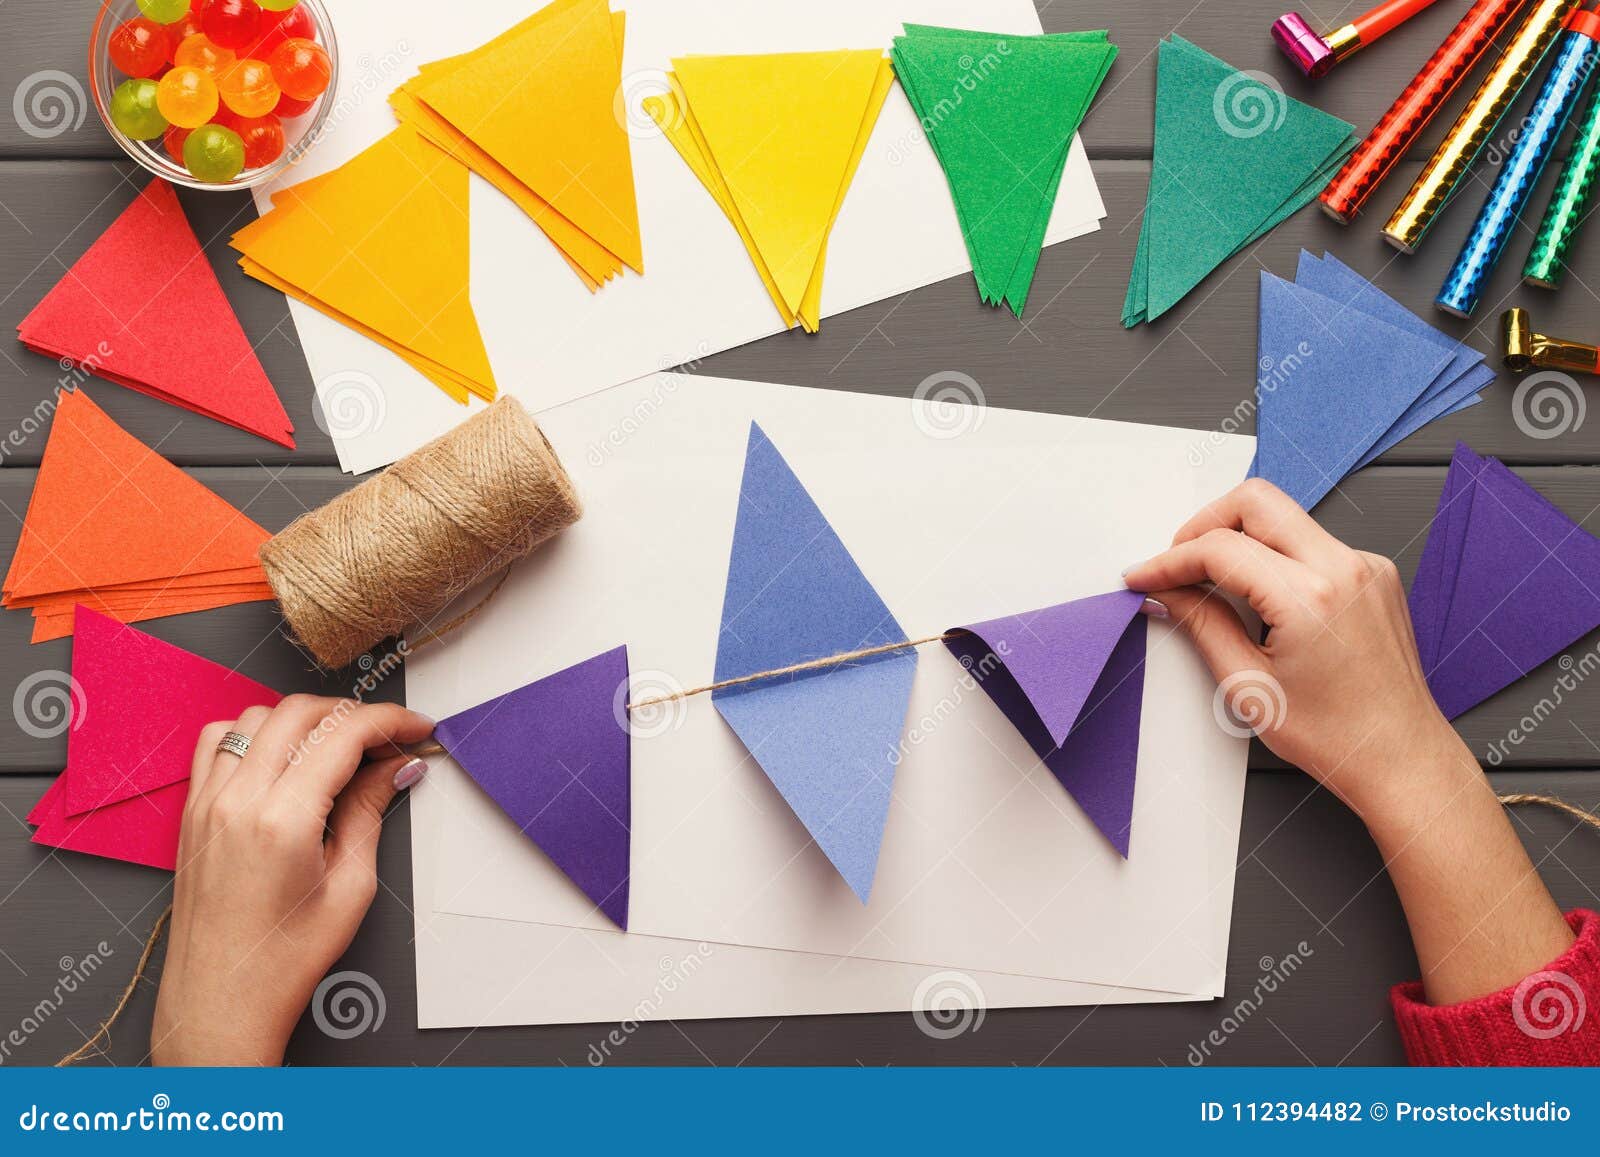 How To Make These Pretty Party Decorations Out Of Paper – Team Colors By  Carrie